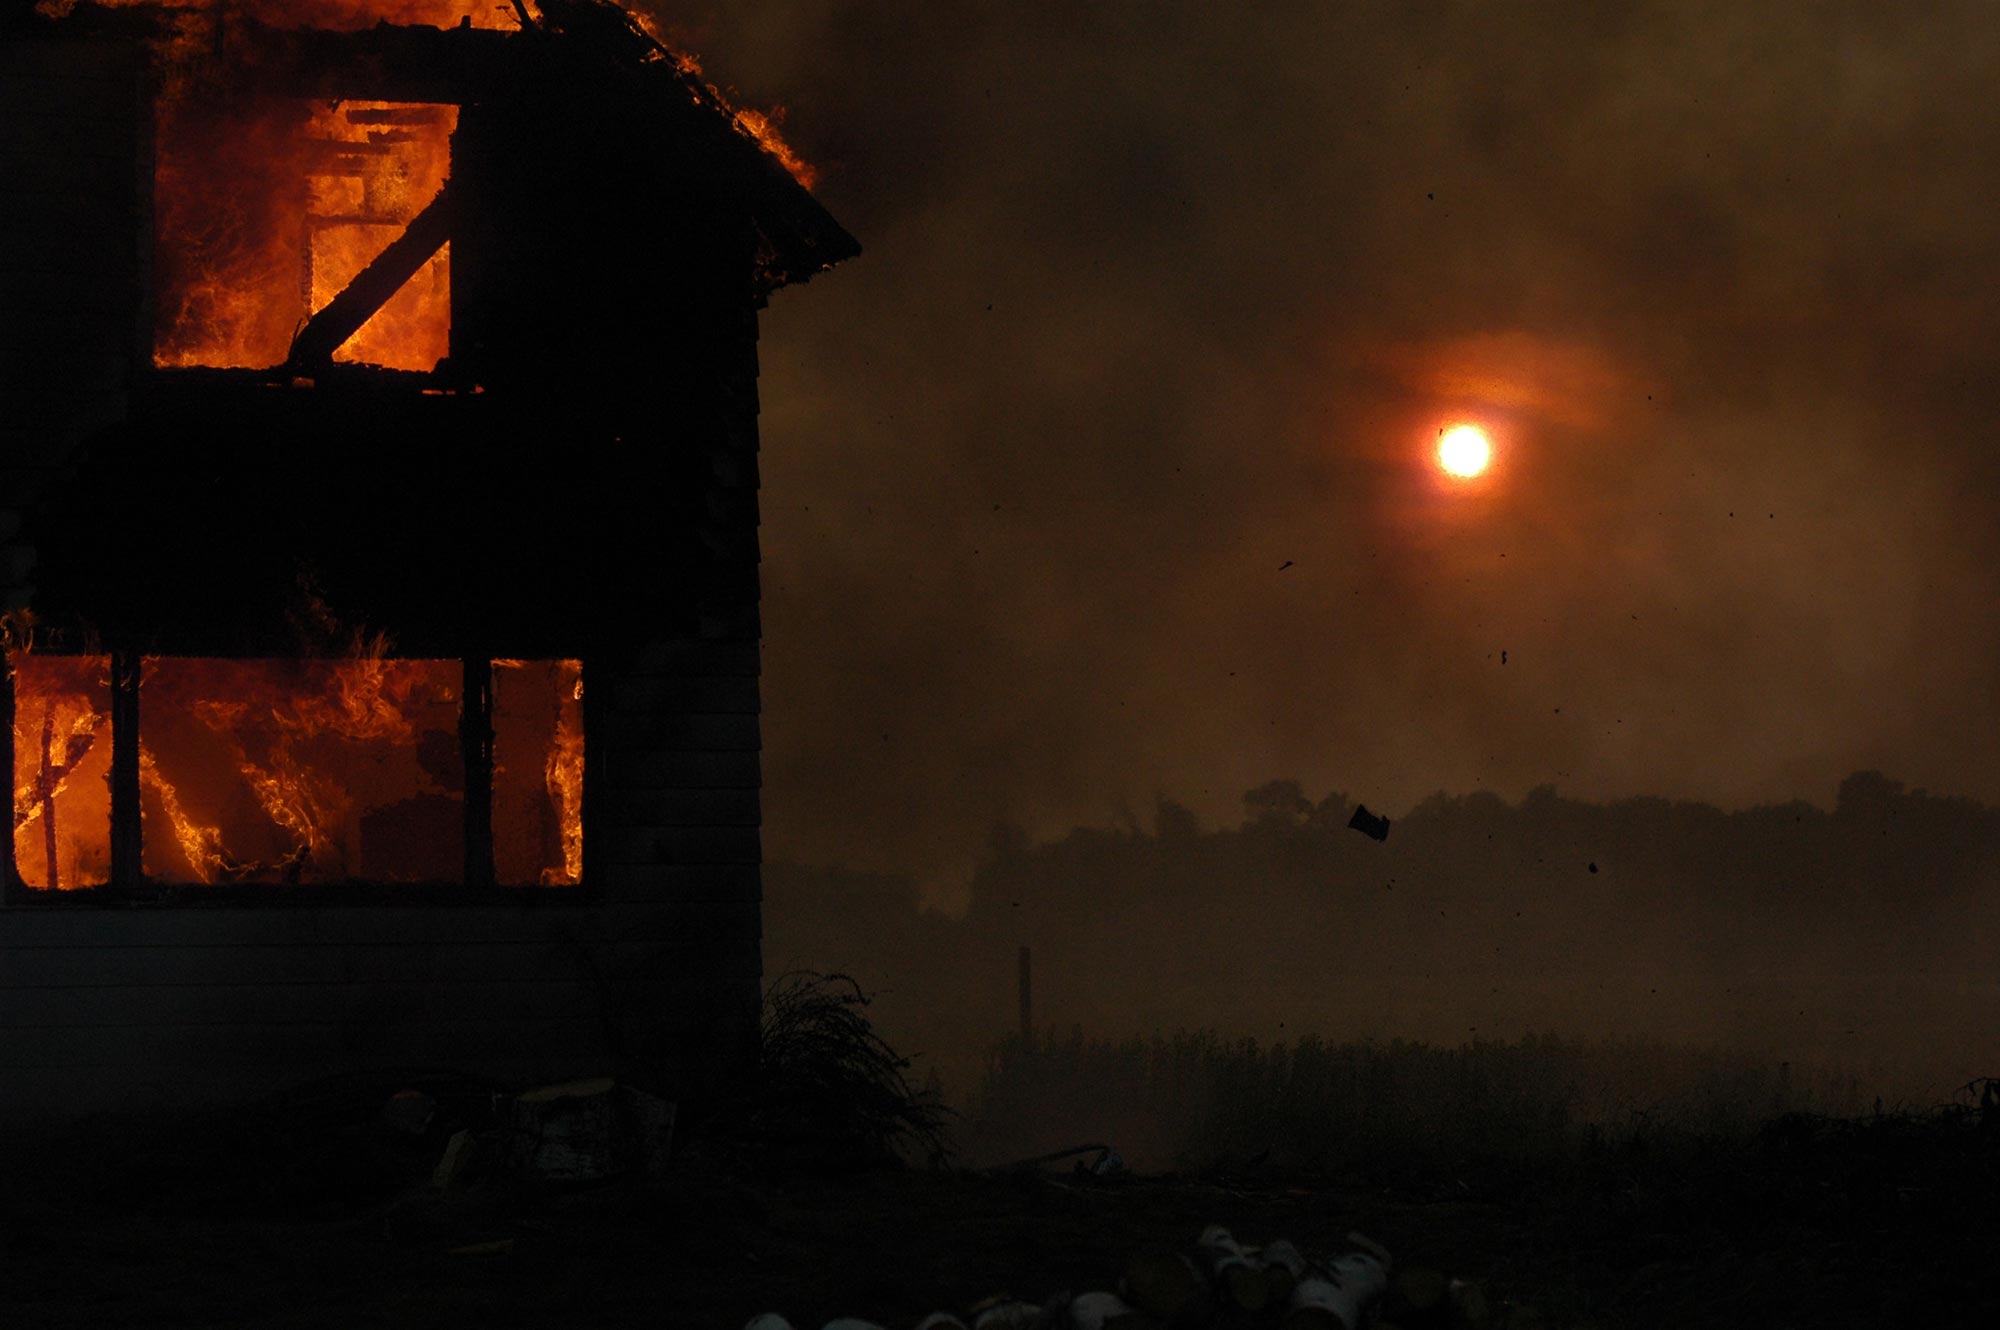 A house is engulfed in flames, causing severe fire damage in the middle of a field.